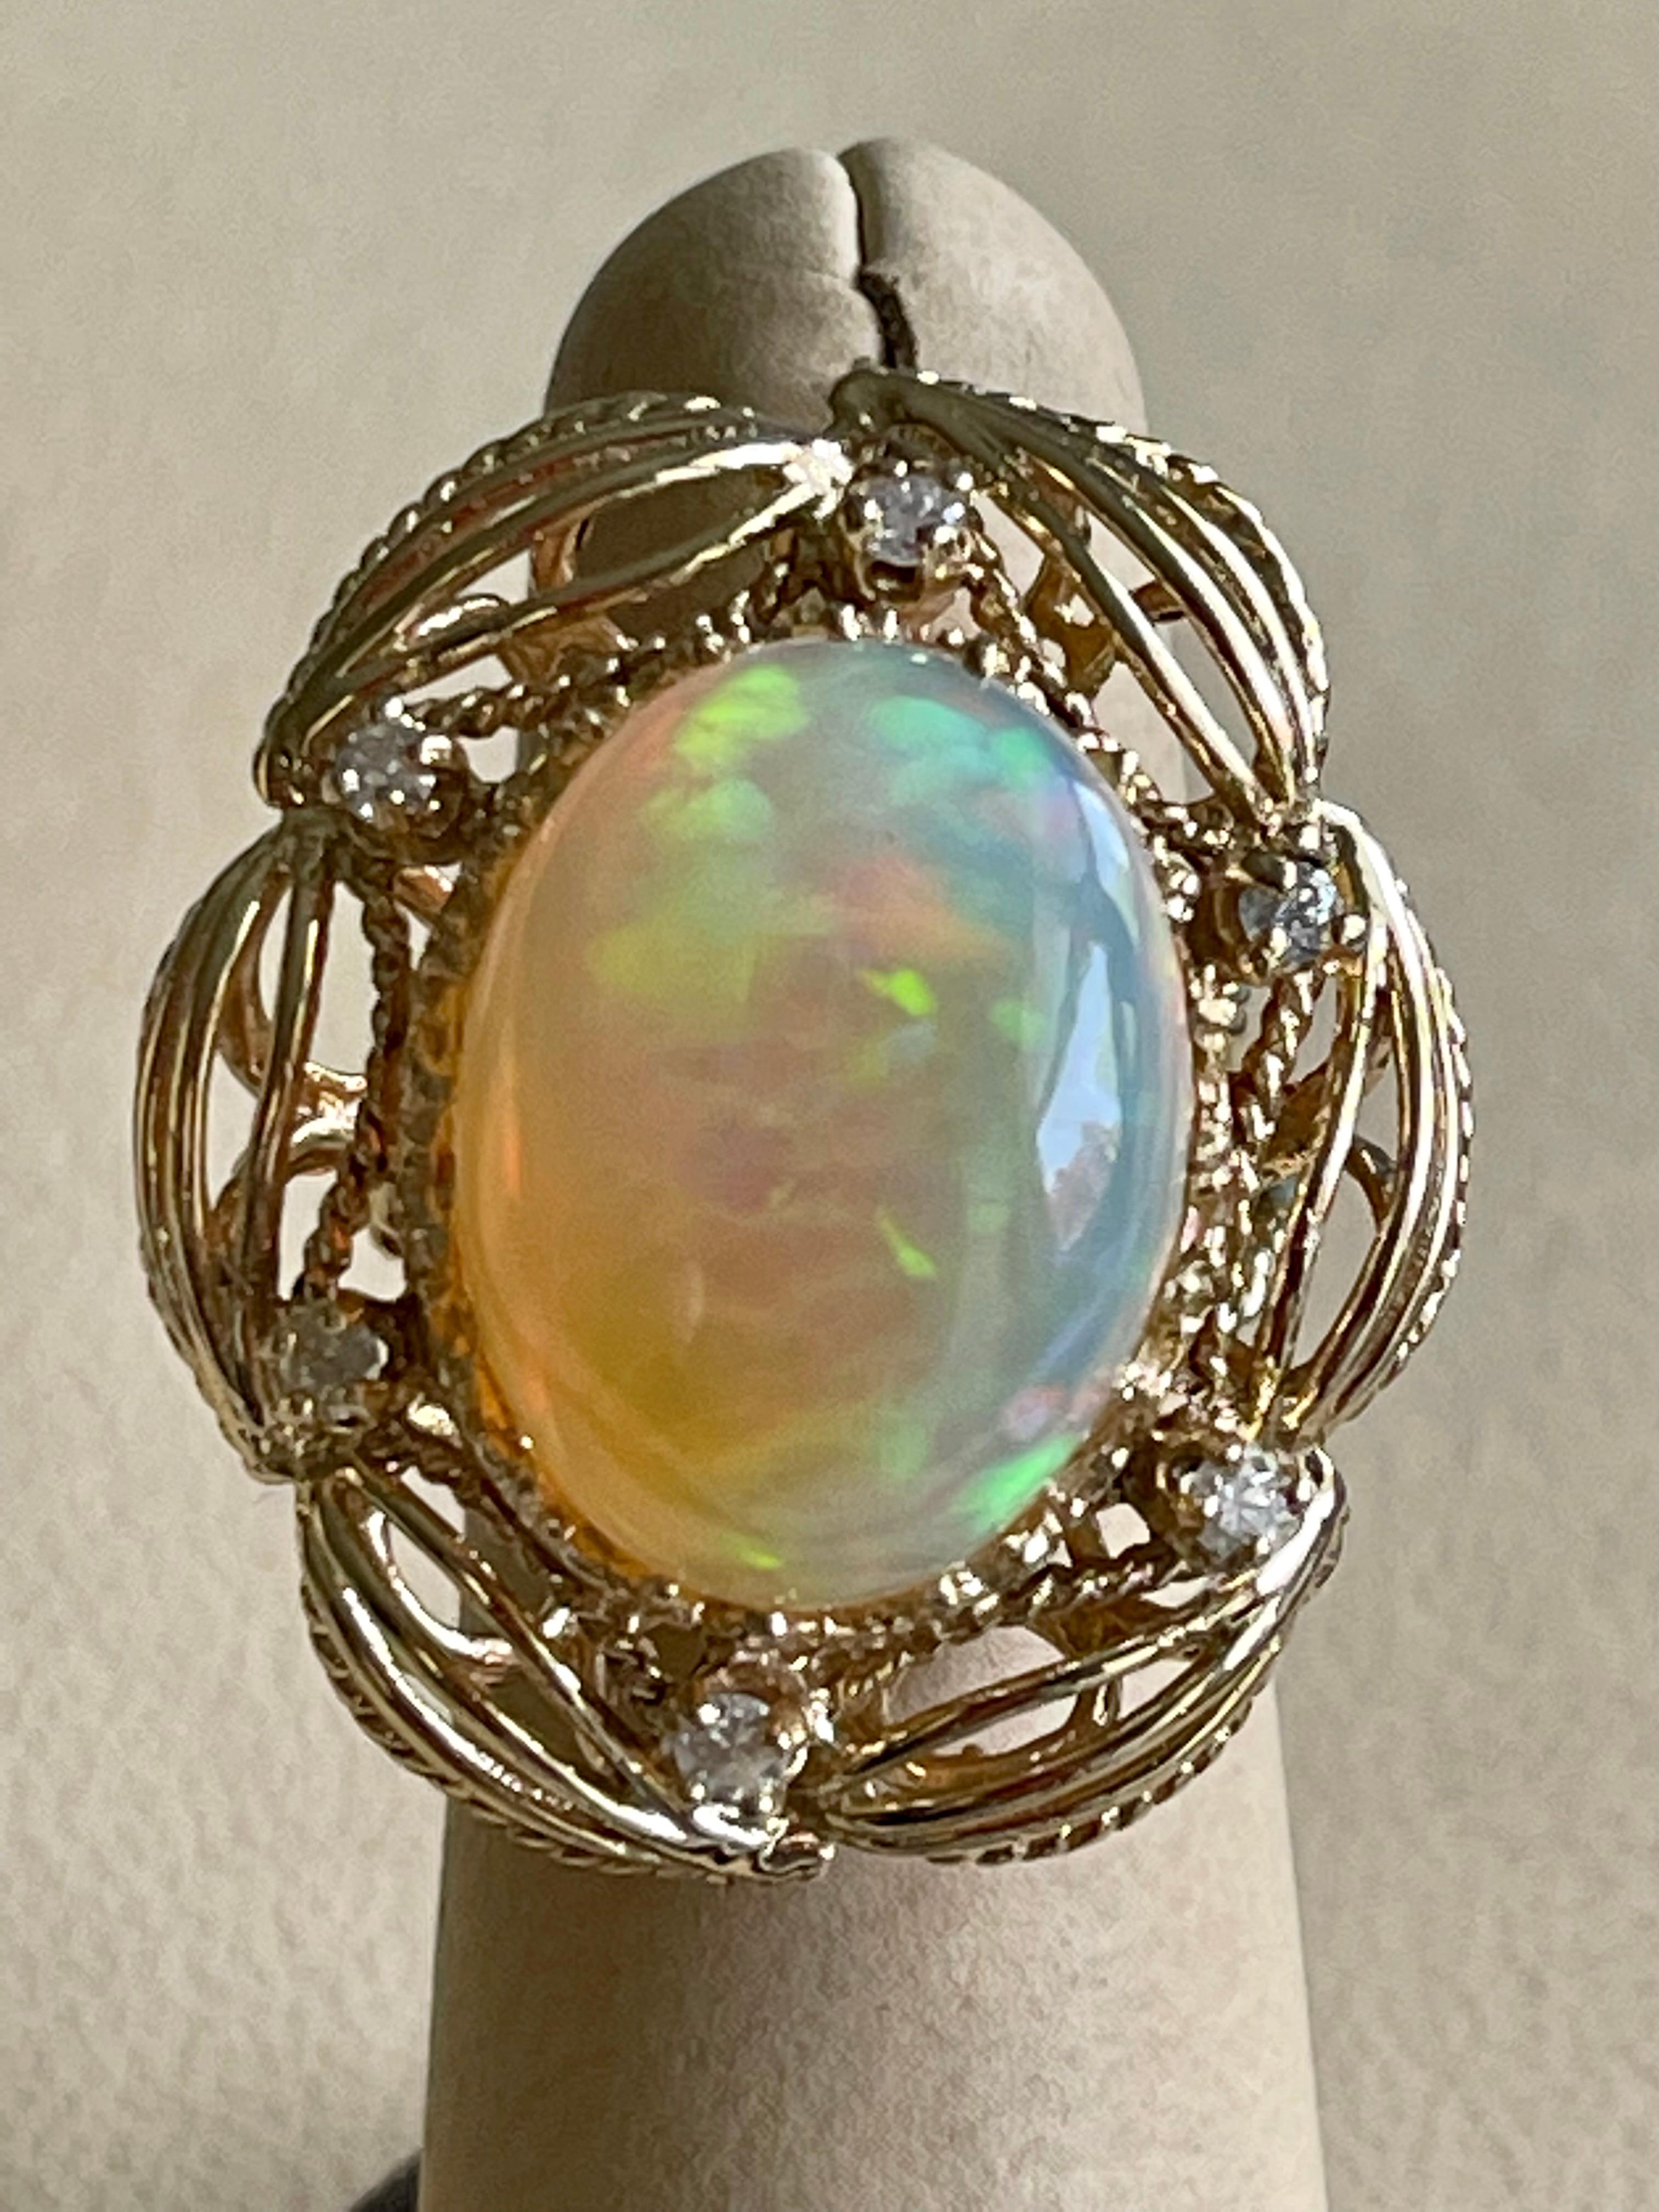 15 Carat Oval Shape Ethiopian Opal Cocktail Ring 14 Karat Yellow Gold Solid Ring For Sale 5